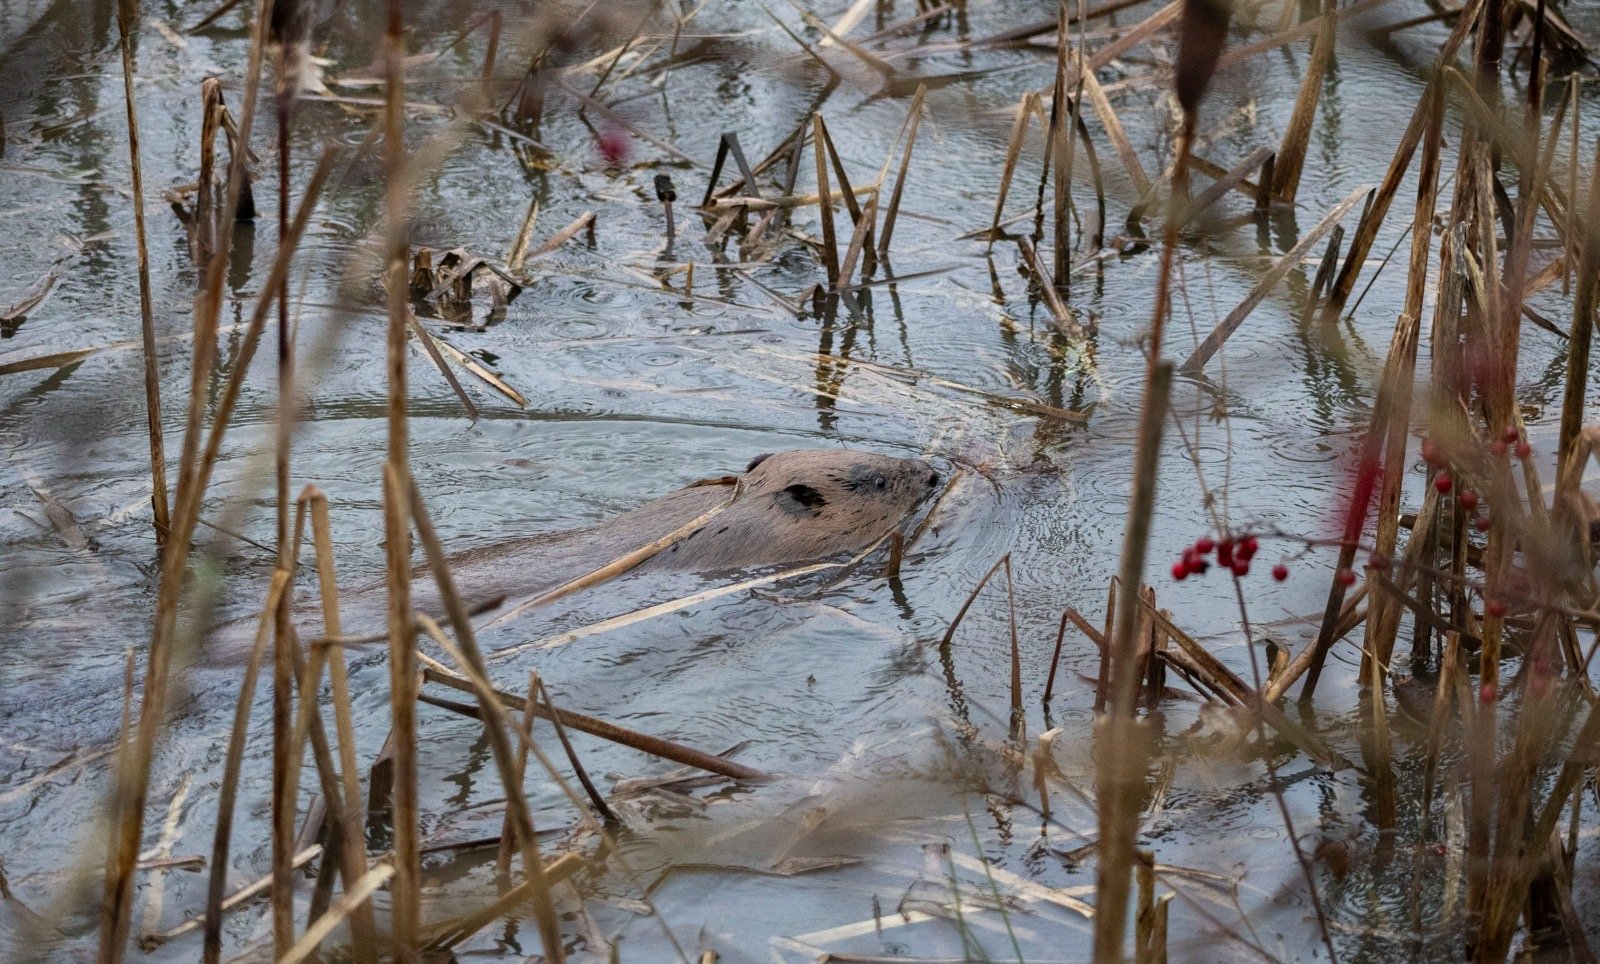 Image of one of the beavers swimming